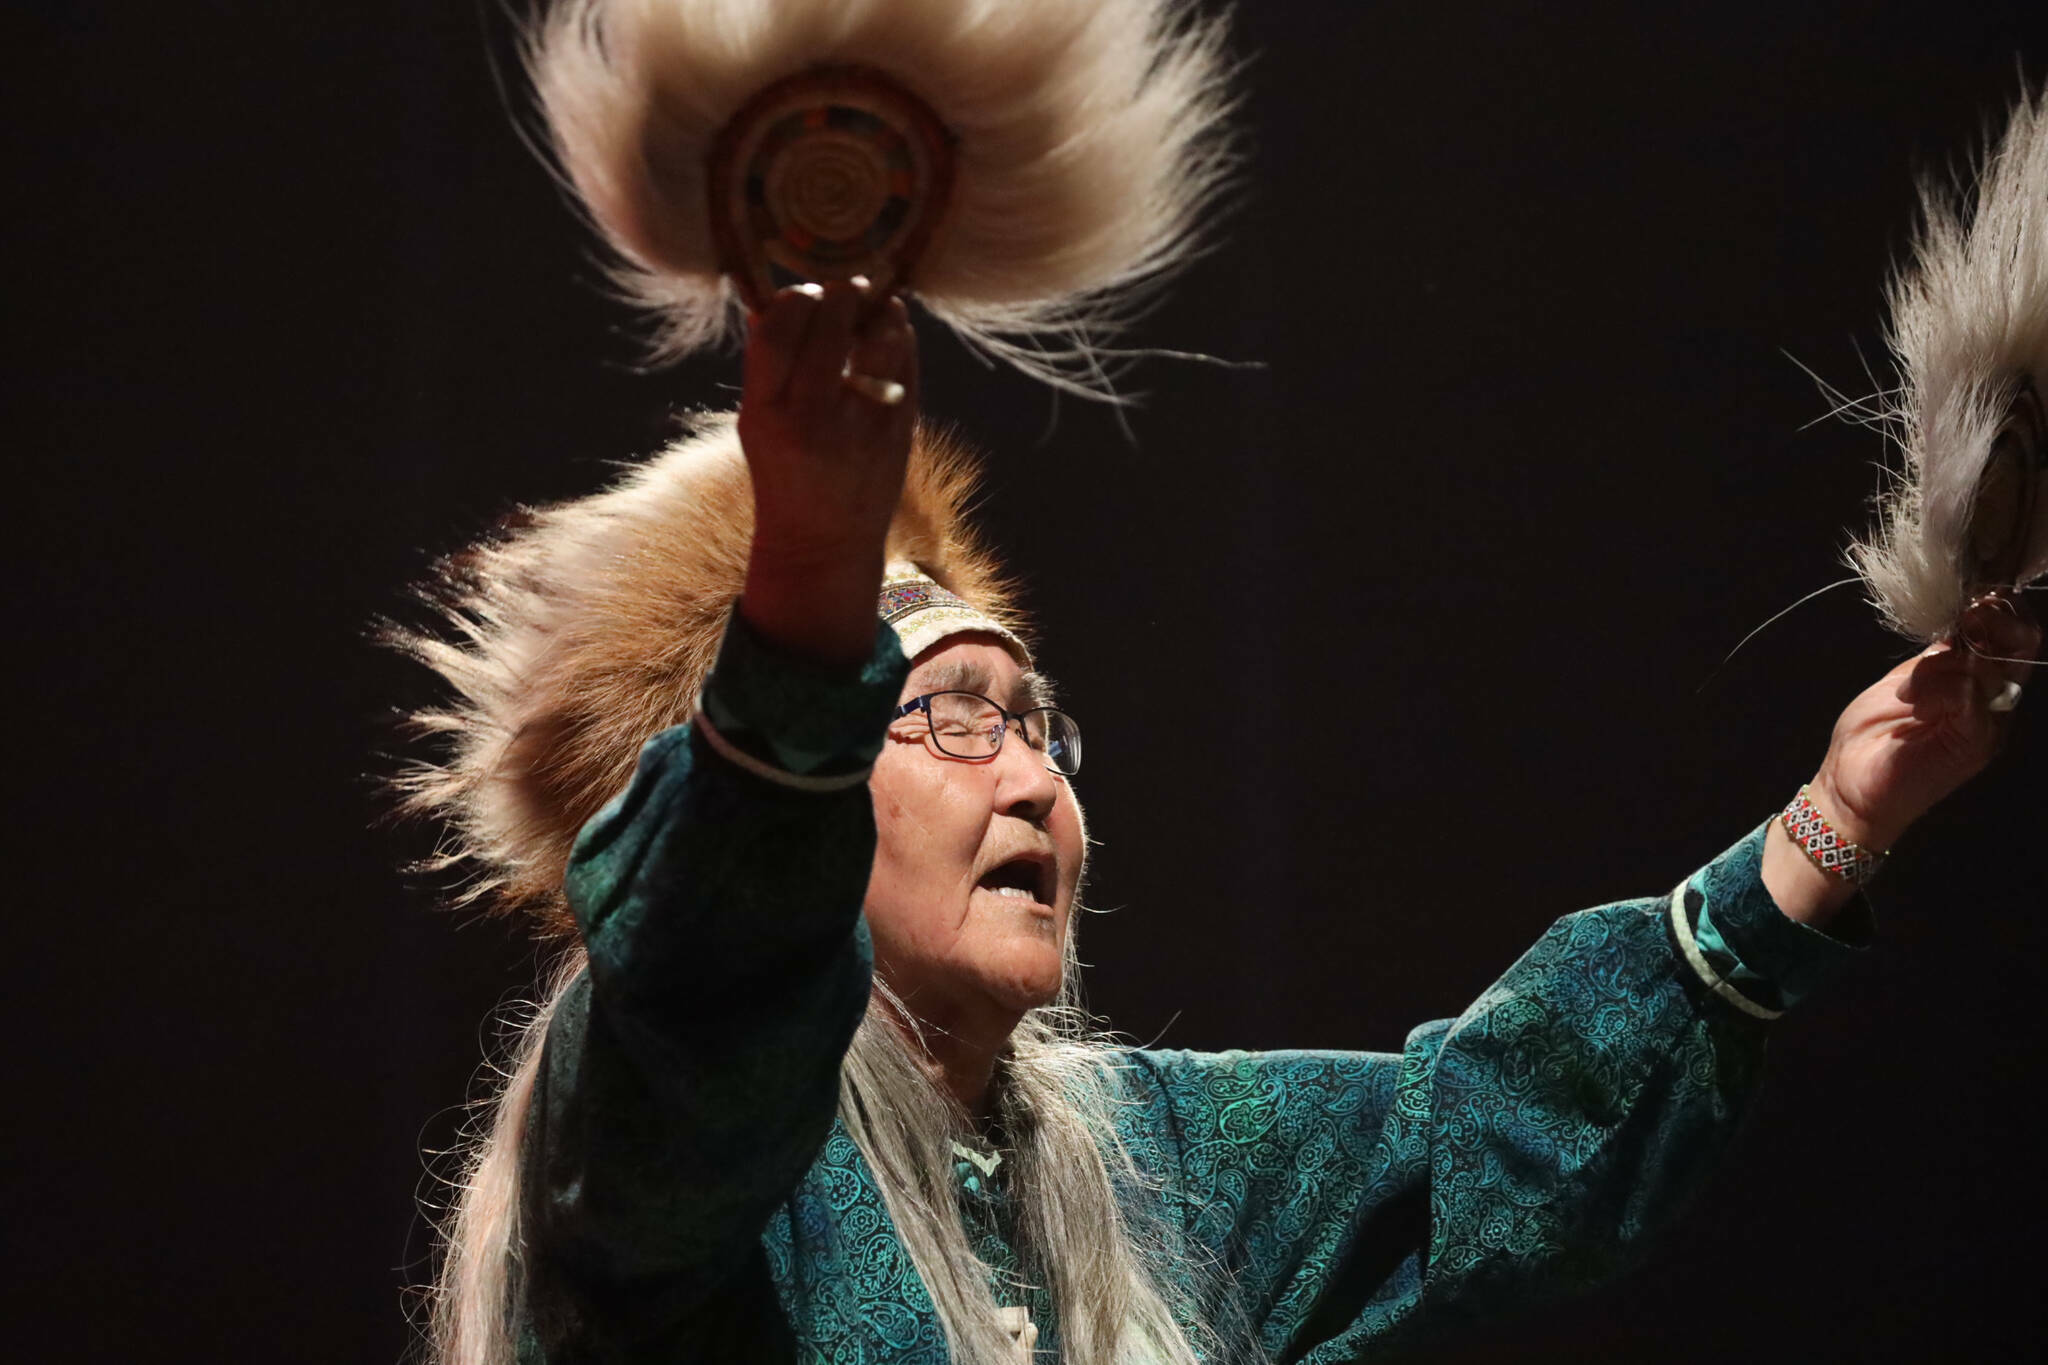 Marie Mead performs a traditional dance during the Inuit-soul musical group Pamyua’s performance as part of the final night of the Áak’w Rock music festival at Centennial Hall on Sept. 23, 2023. (Clarise Larson / Juneau Empire file photo)